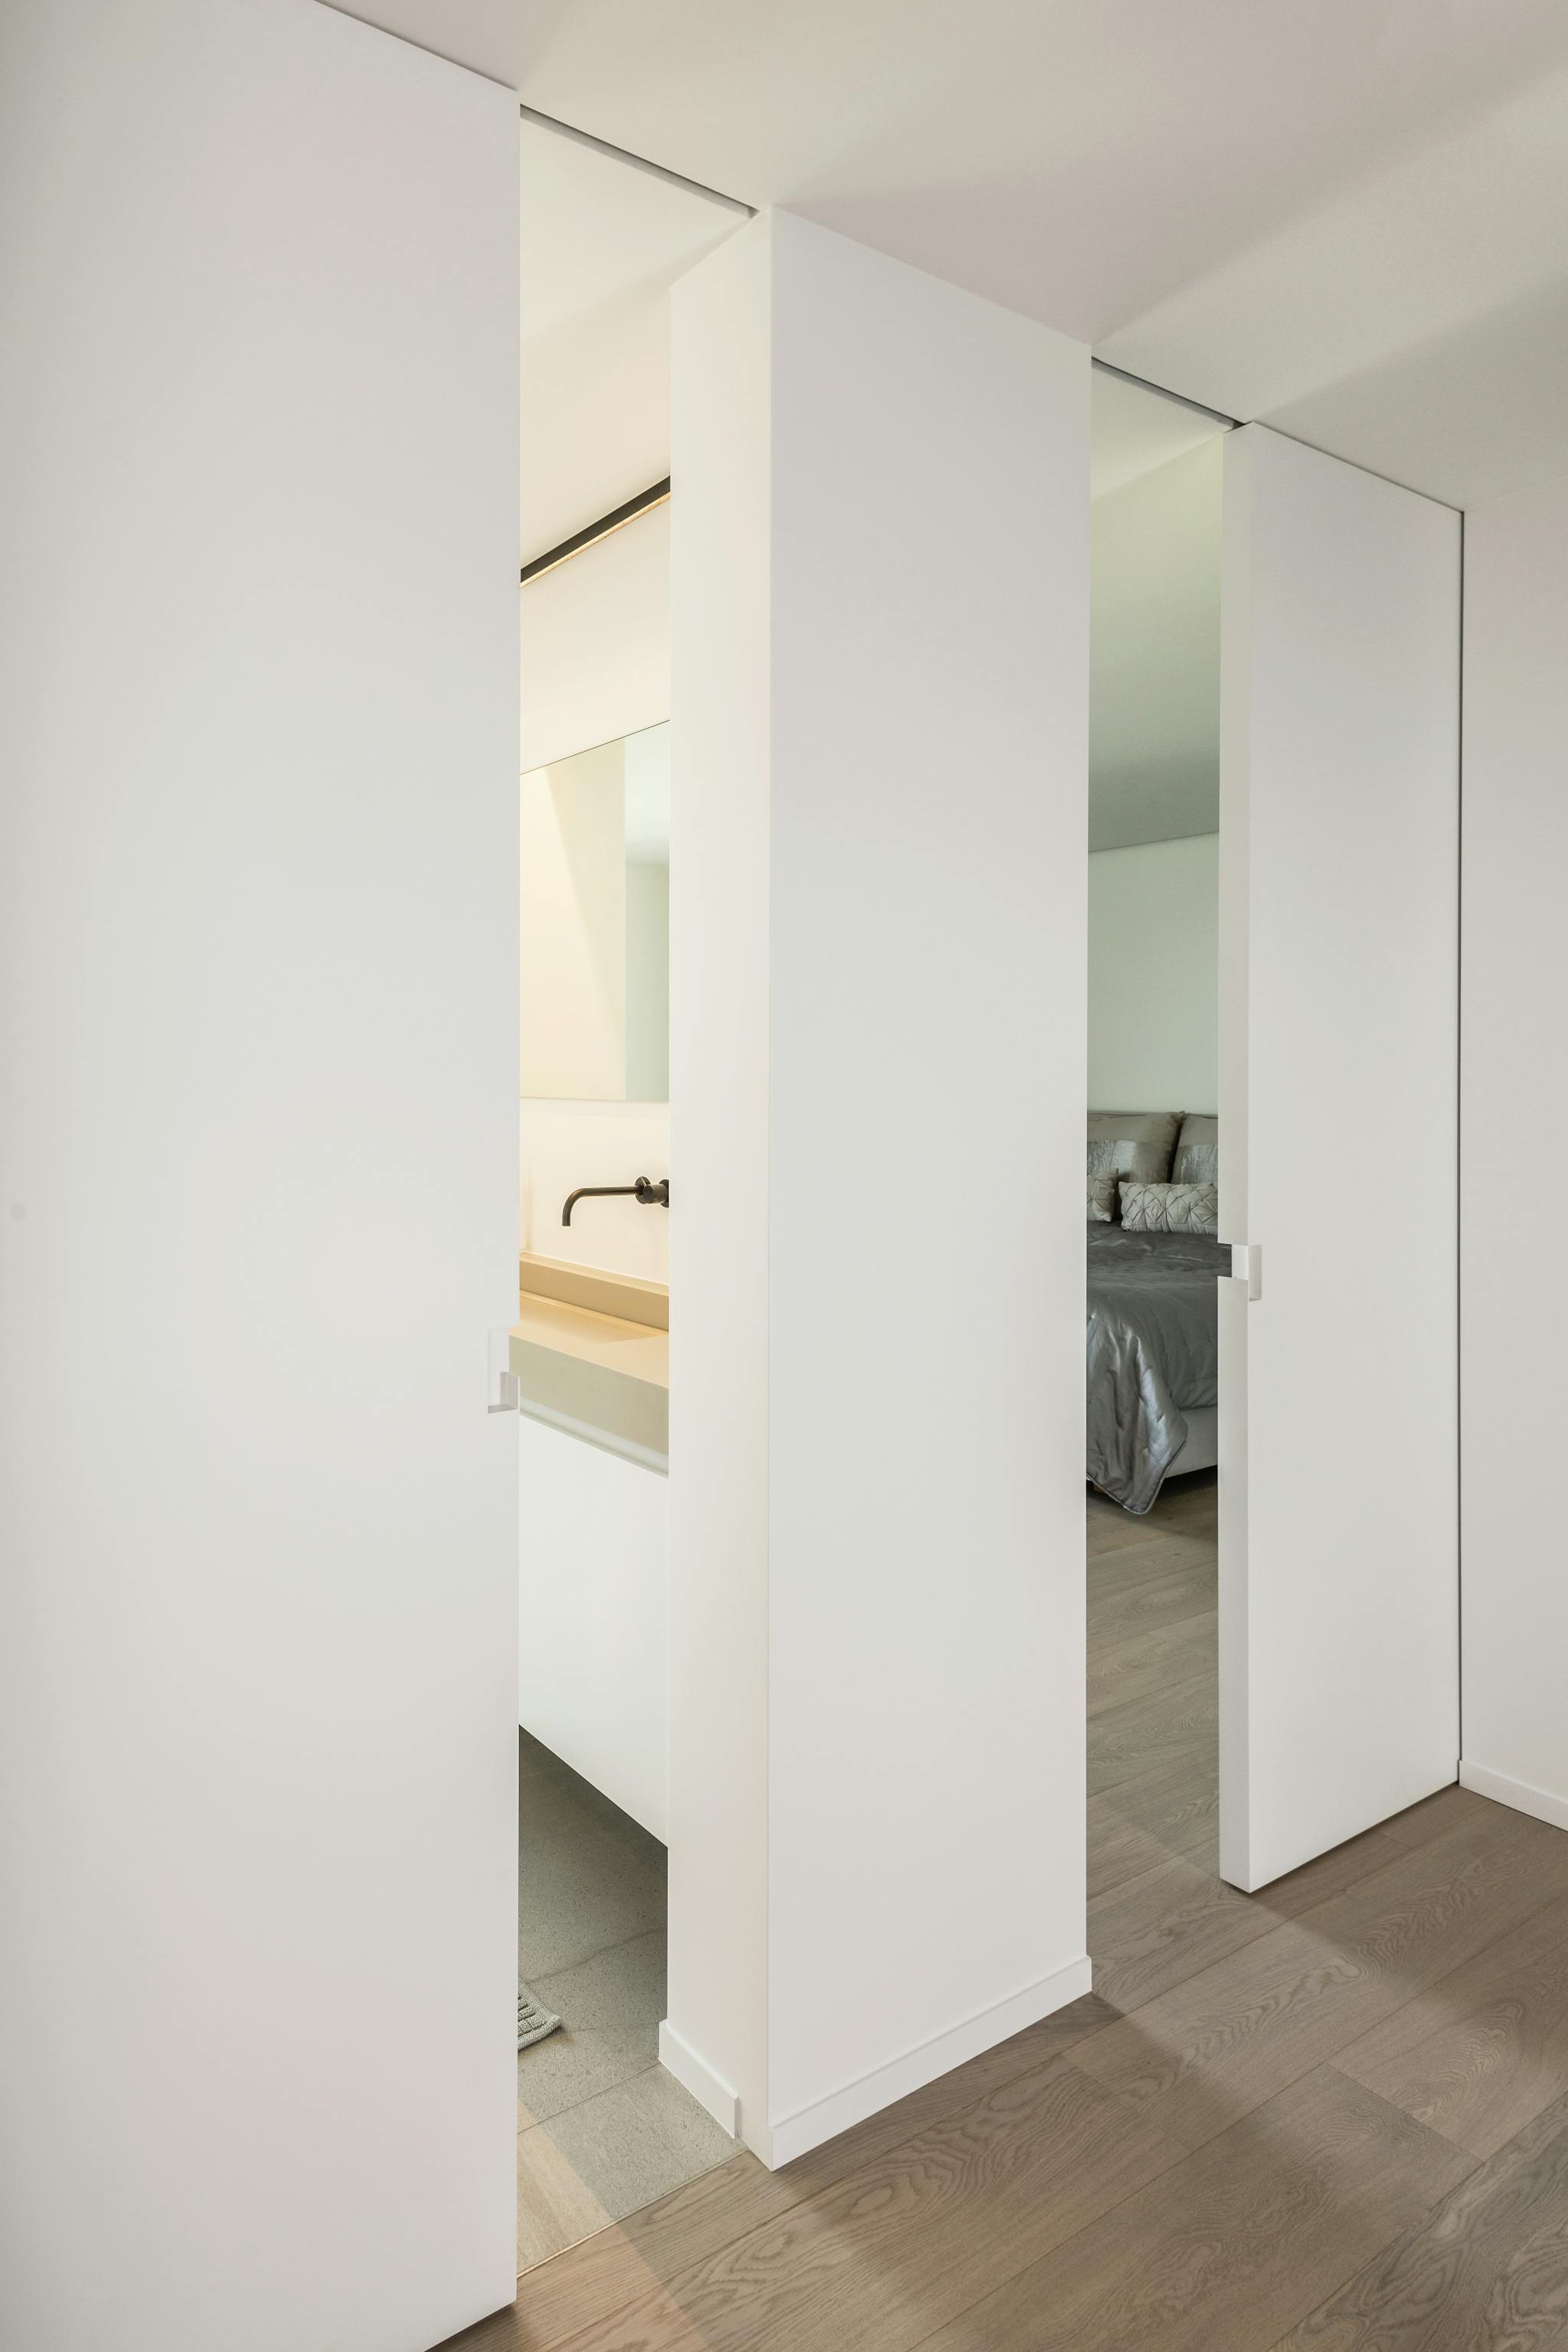 Two white single sliding pocket doors in a private home leading to a bathroom and bedroom, with dark wooden flooring and white minimal interior